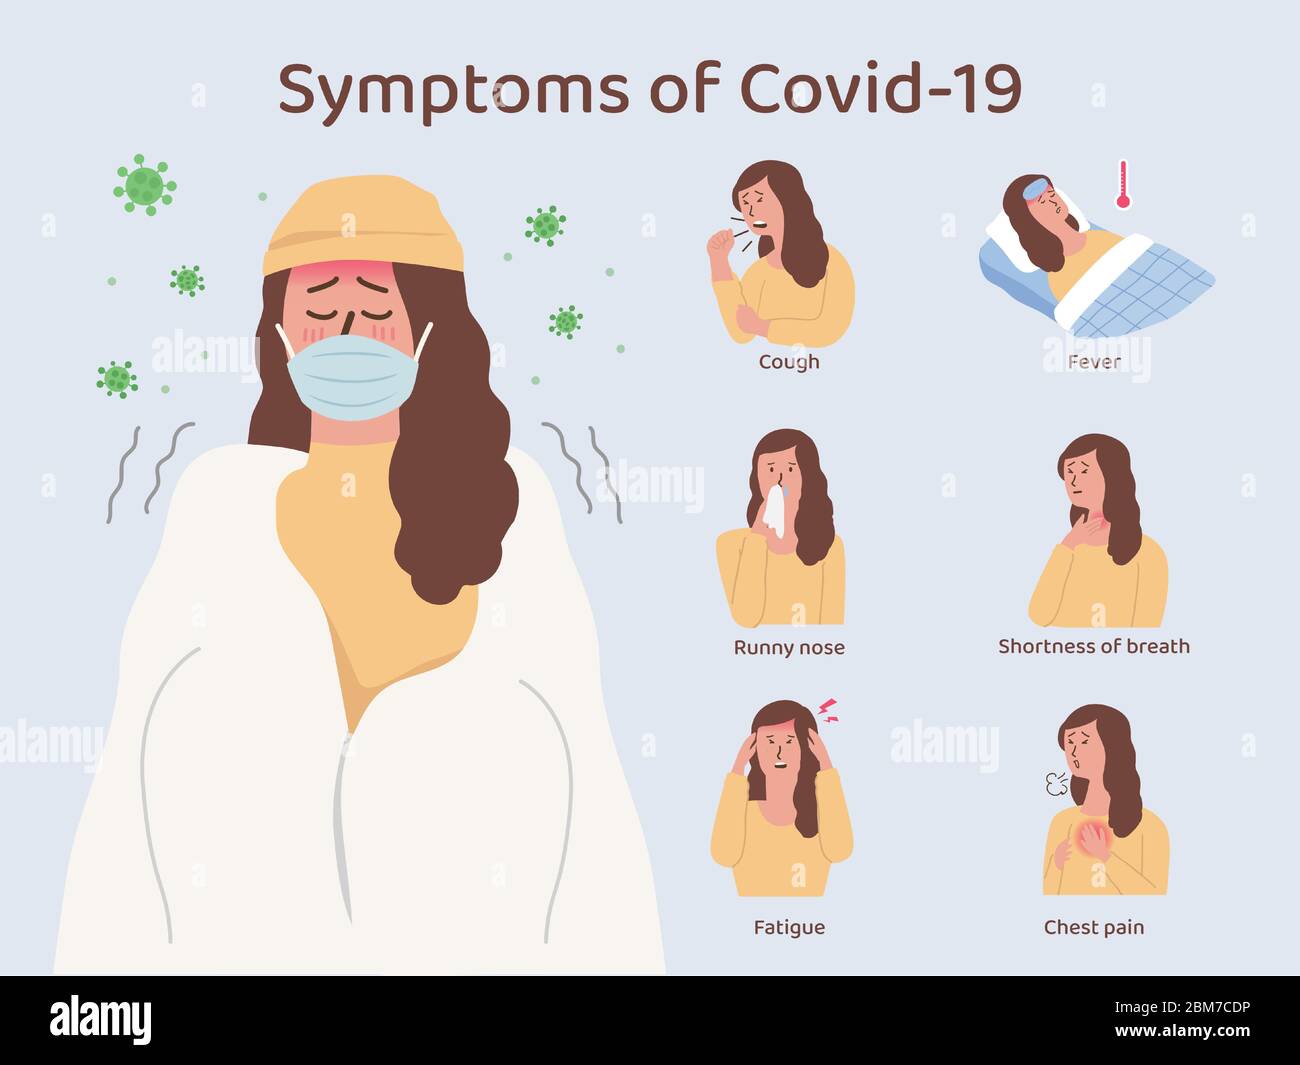 Woman cover the body with blankets and wear a Hygiene mask and show the symptoms of Covid-19. Health check up for patients from coronavirus. Stock Vector